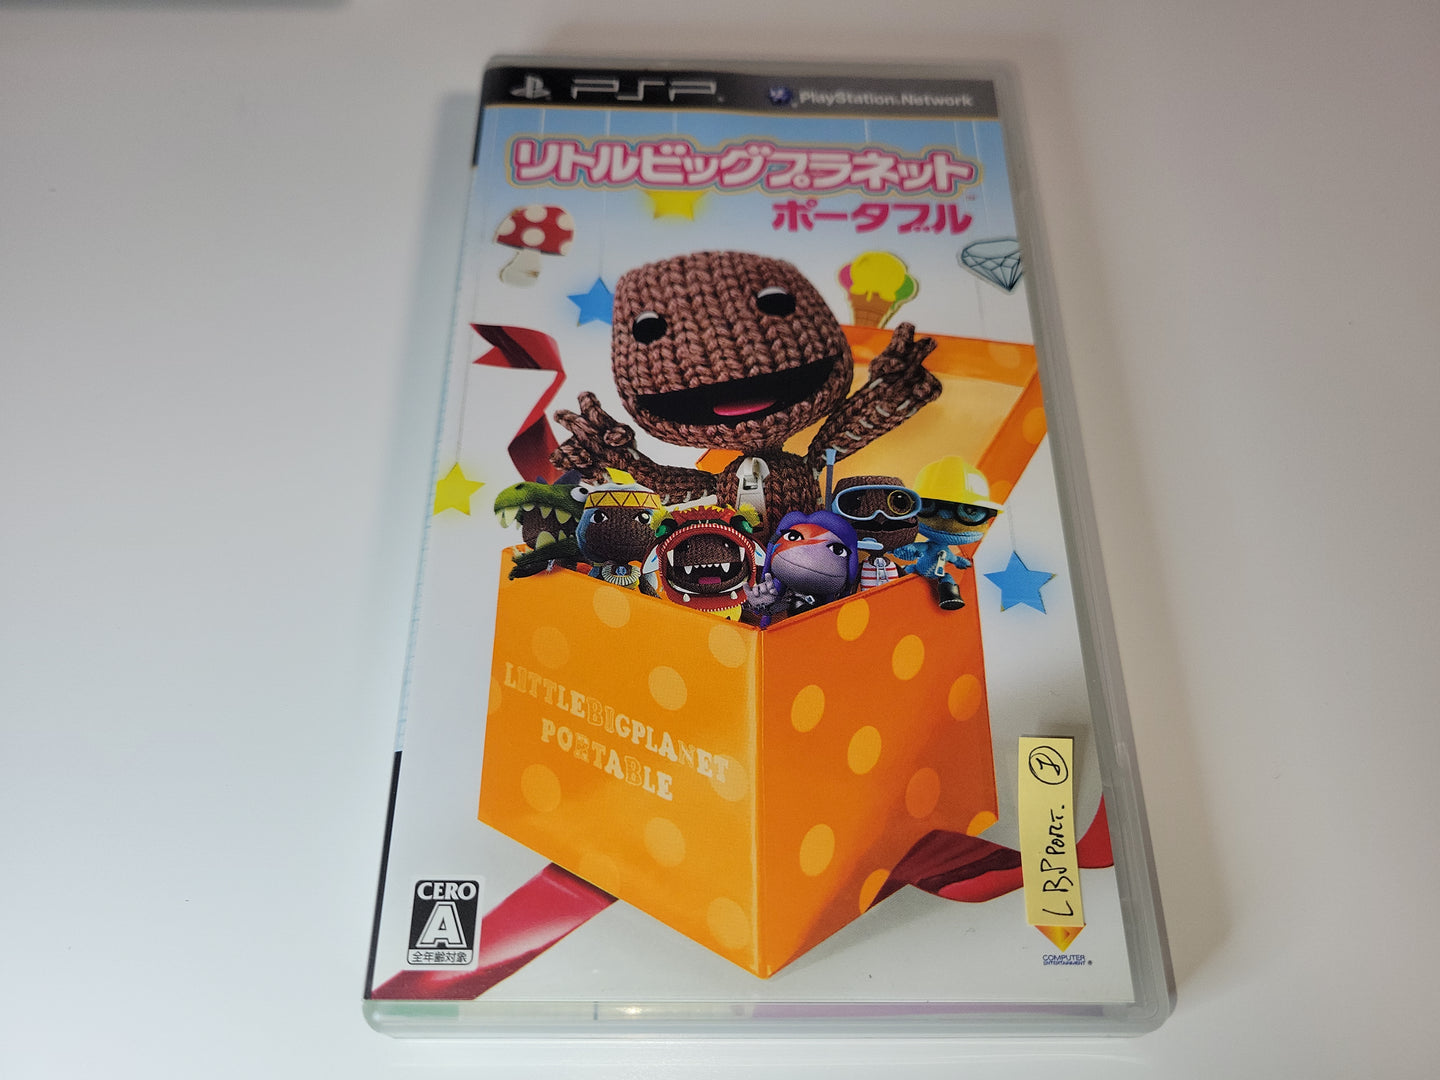 Little Big Planet Portable - Sony PSP Playstation Portable